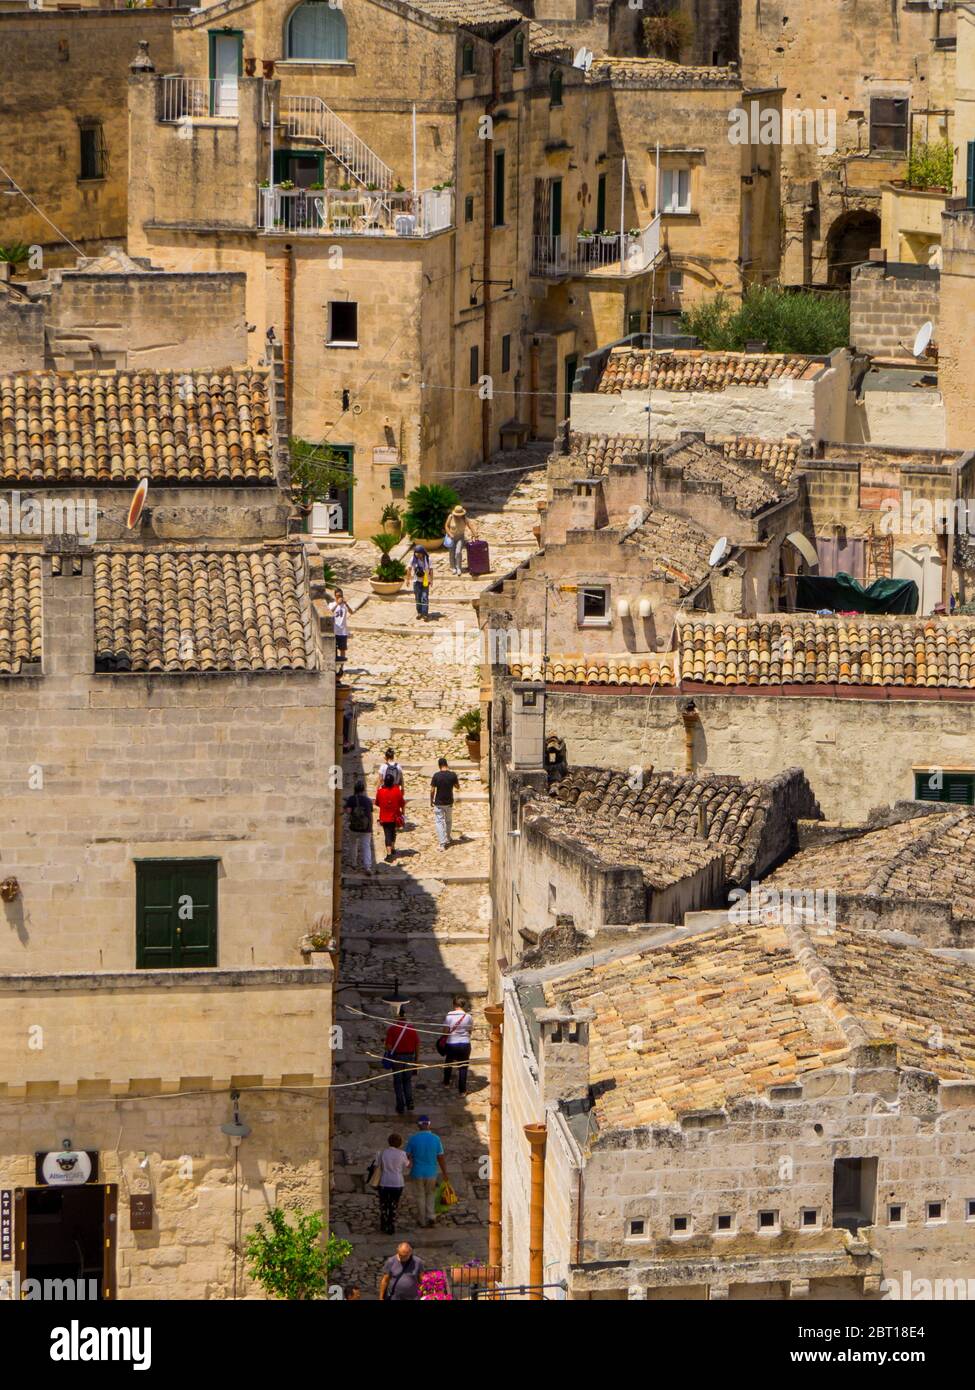 Picturesque street in Matera, Italy Stock Photo